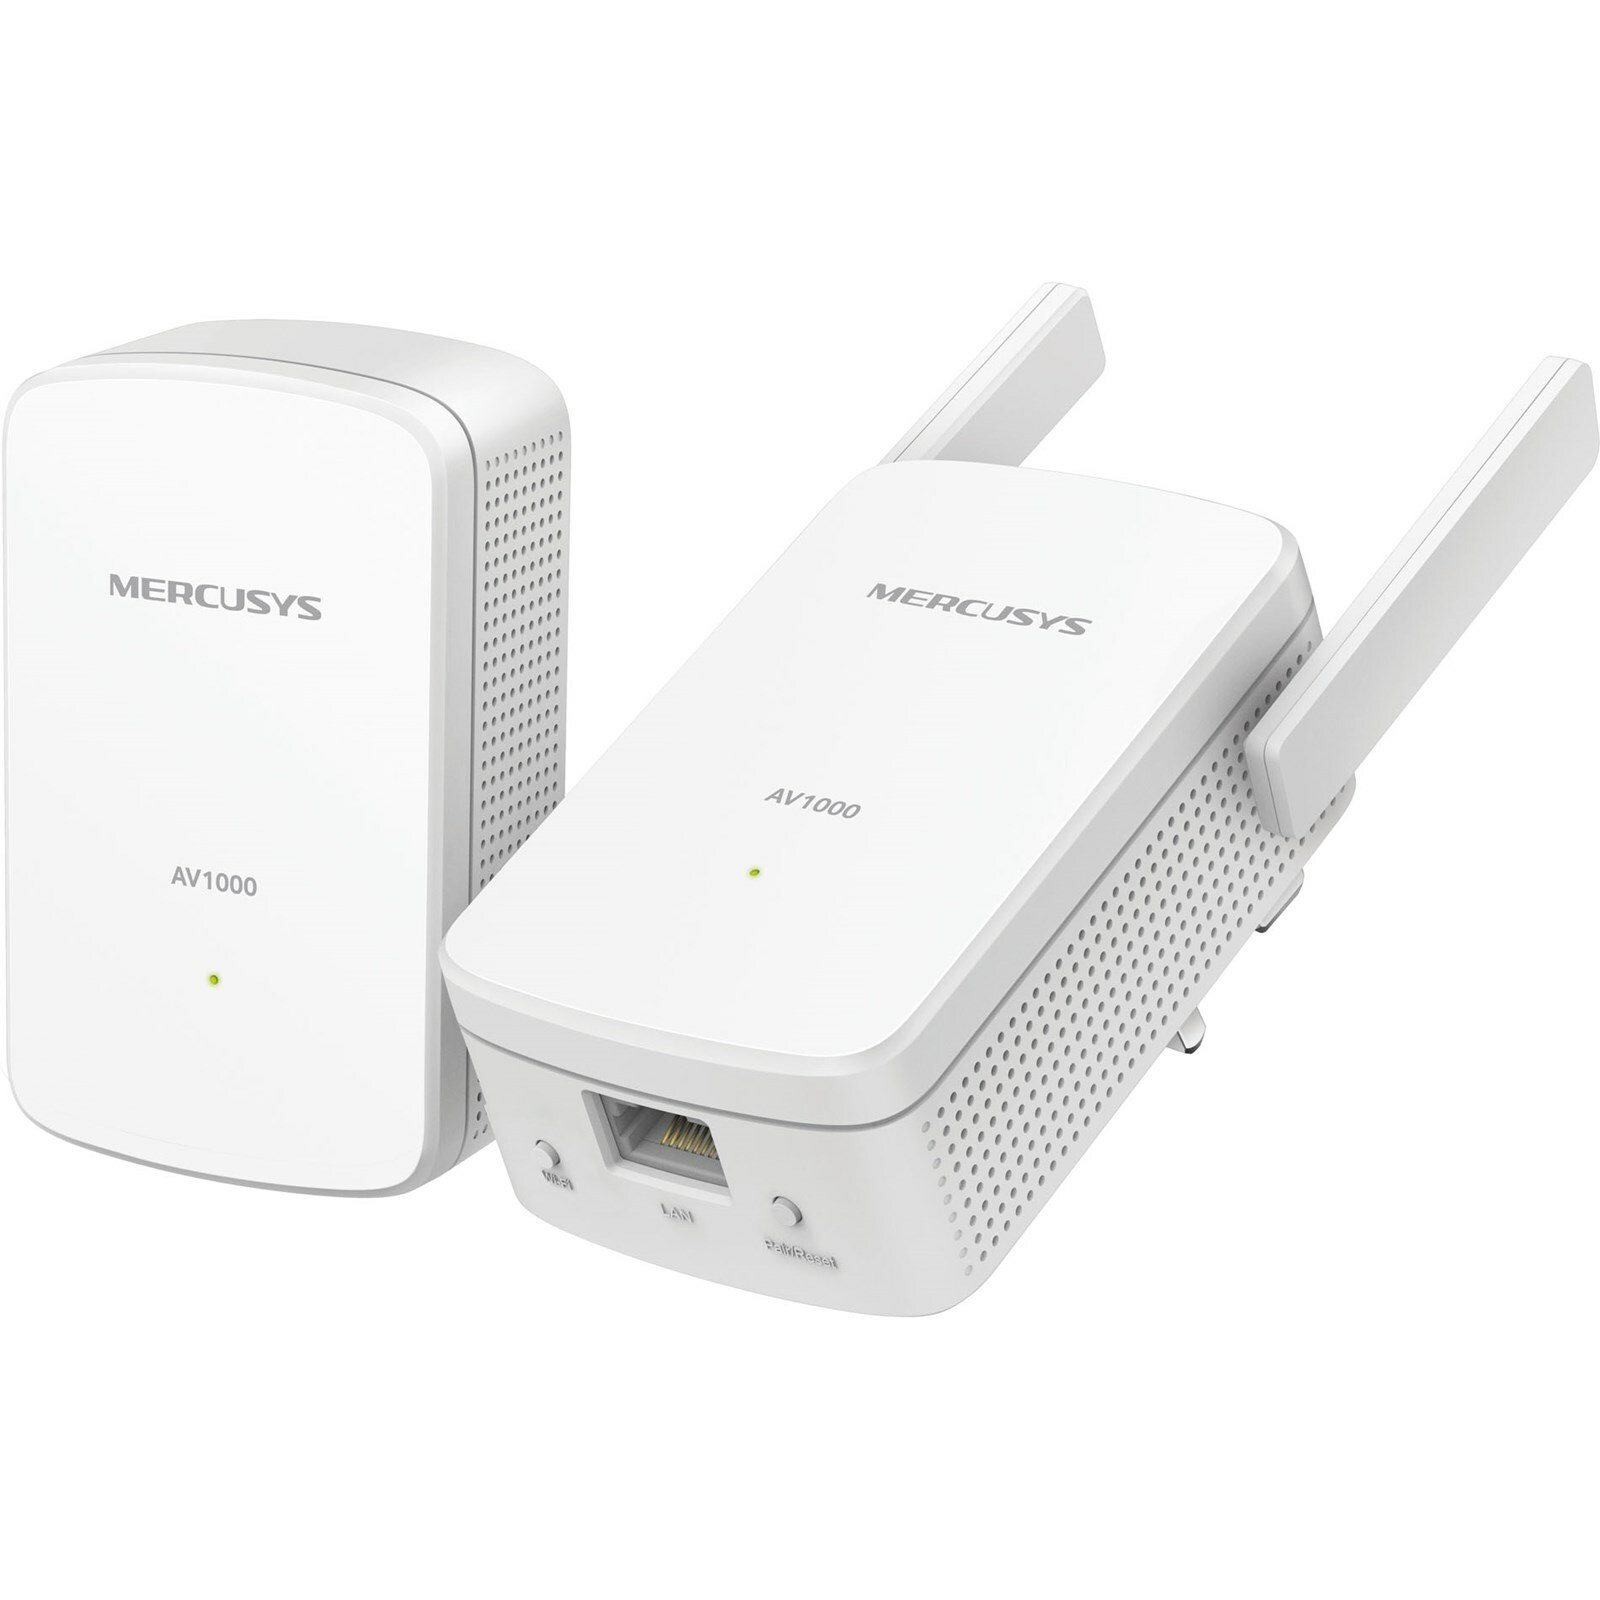 Mercusys 1000mb Powerline Adapter Kit with 300Mbps Wireless N, AV2 1000, 1Port Falcon Computers